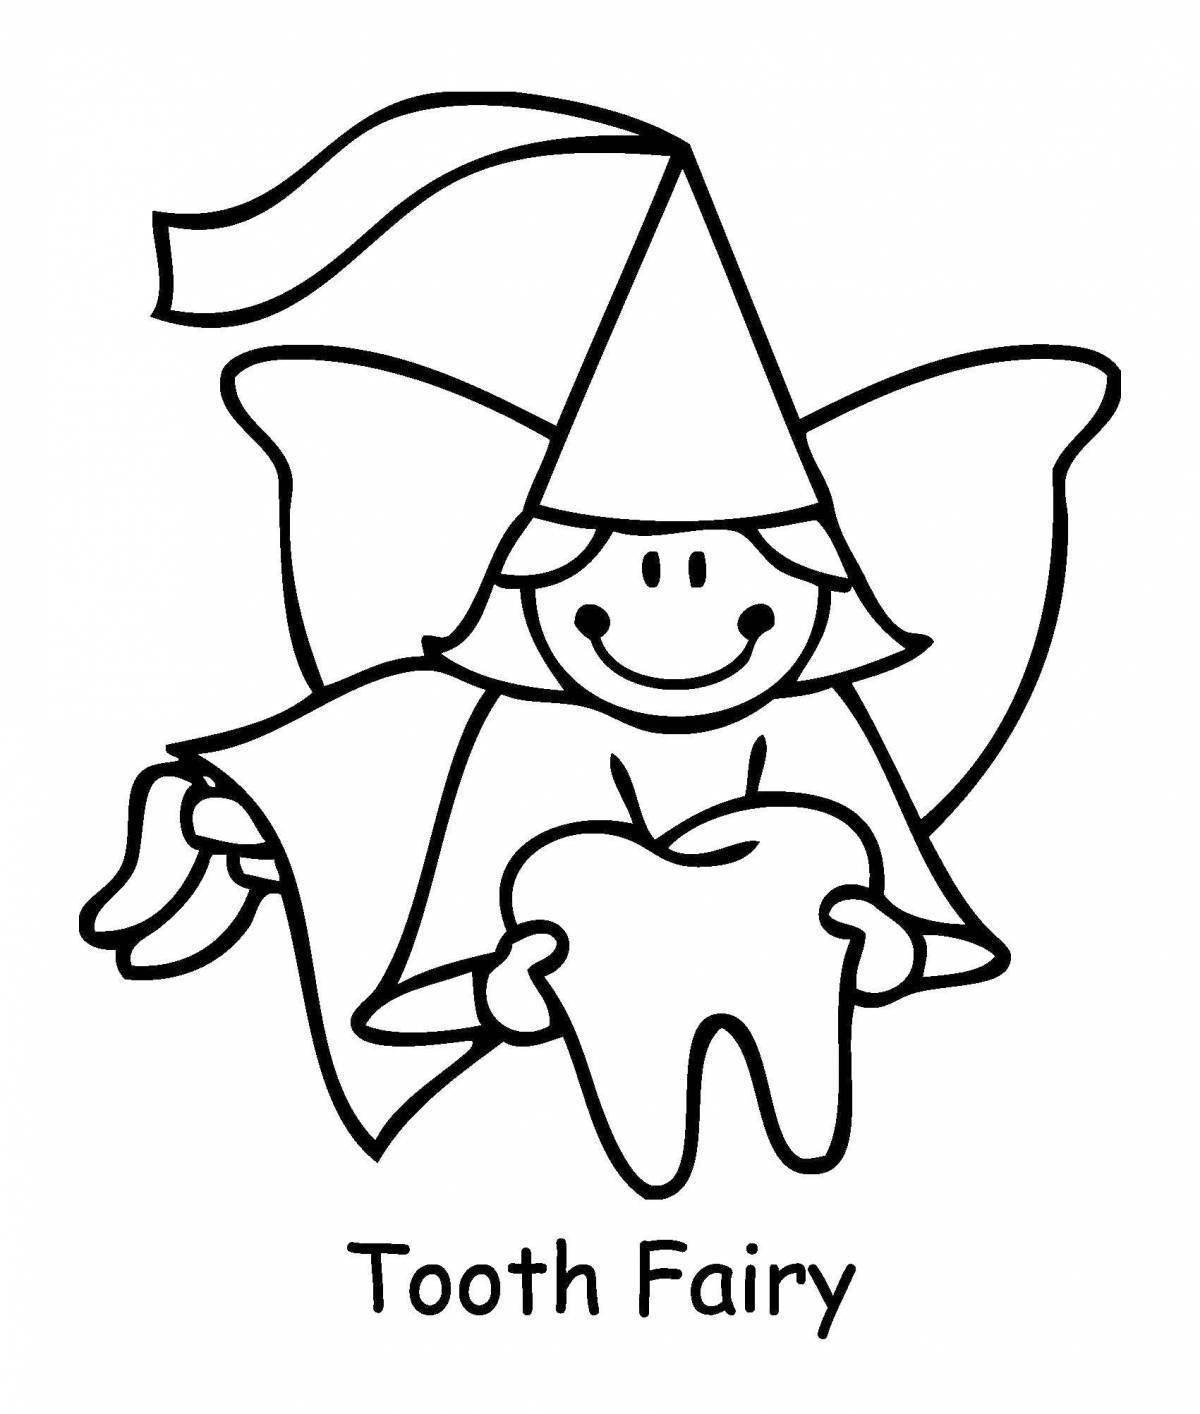 Colorful fairy tooth coloring book